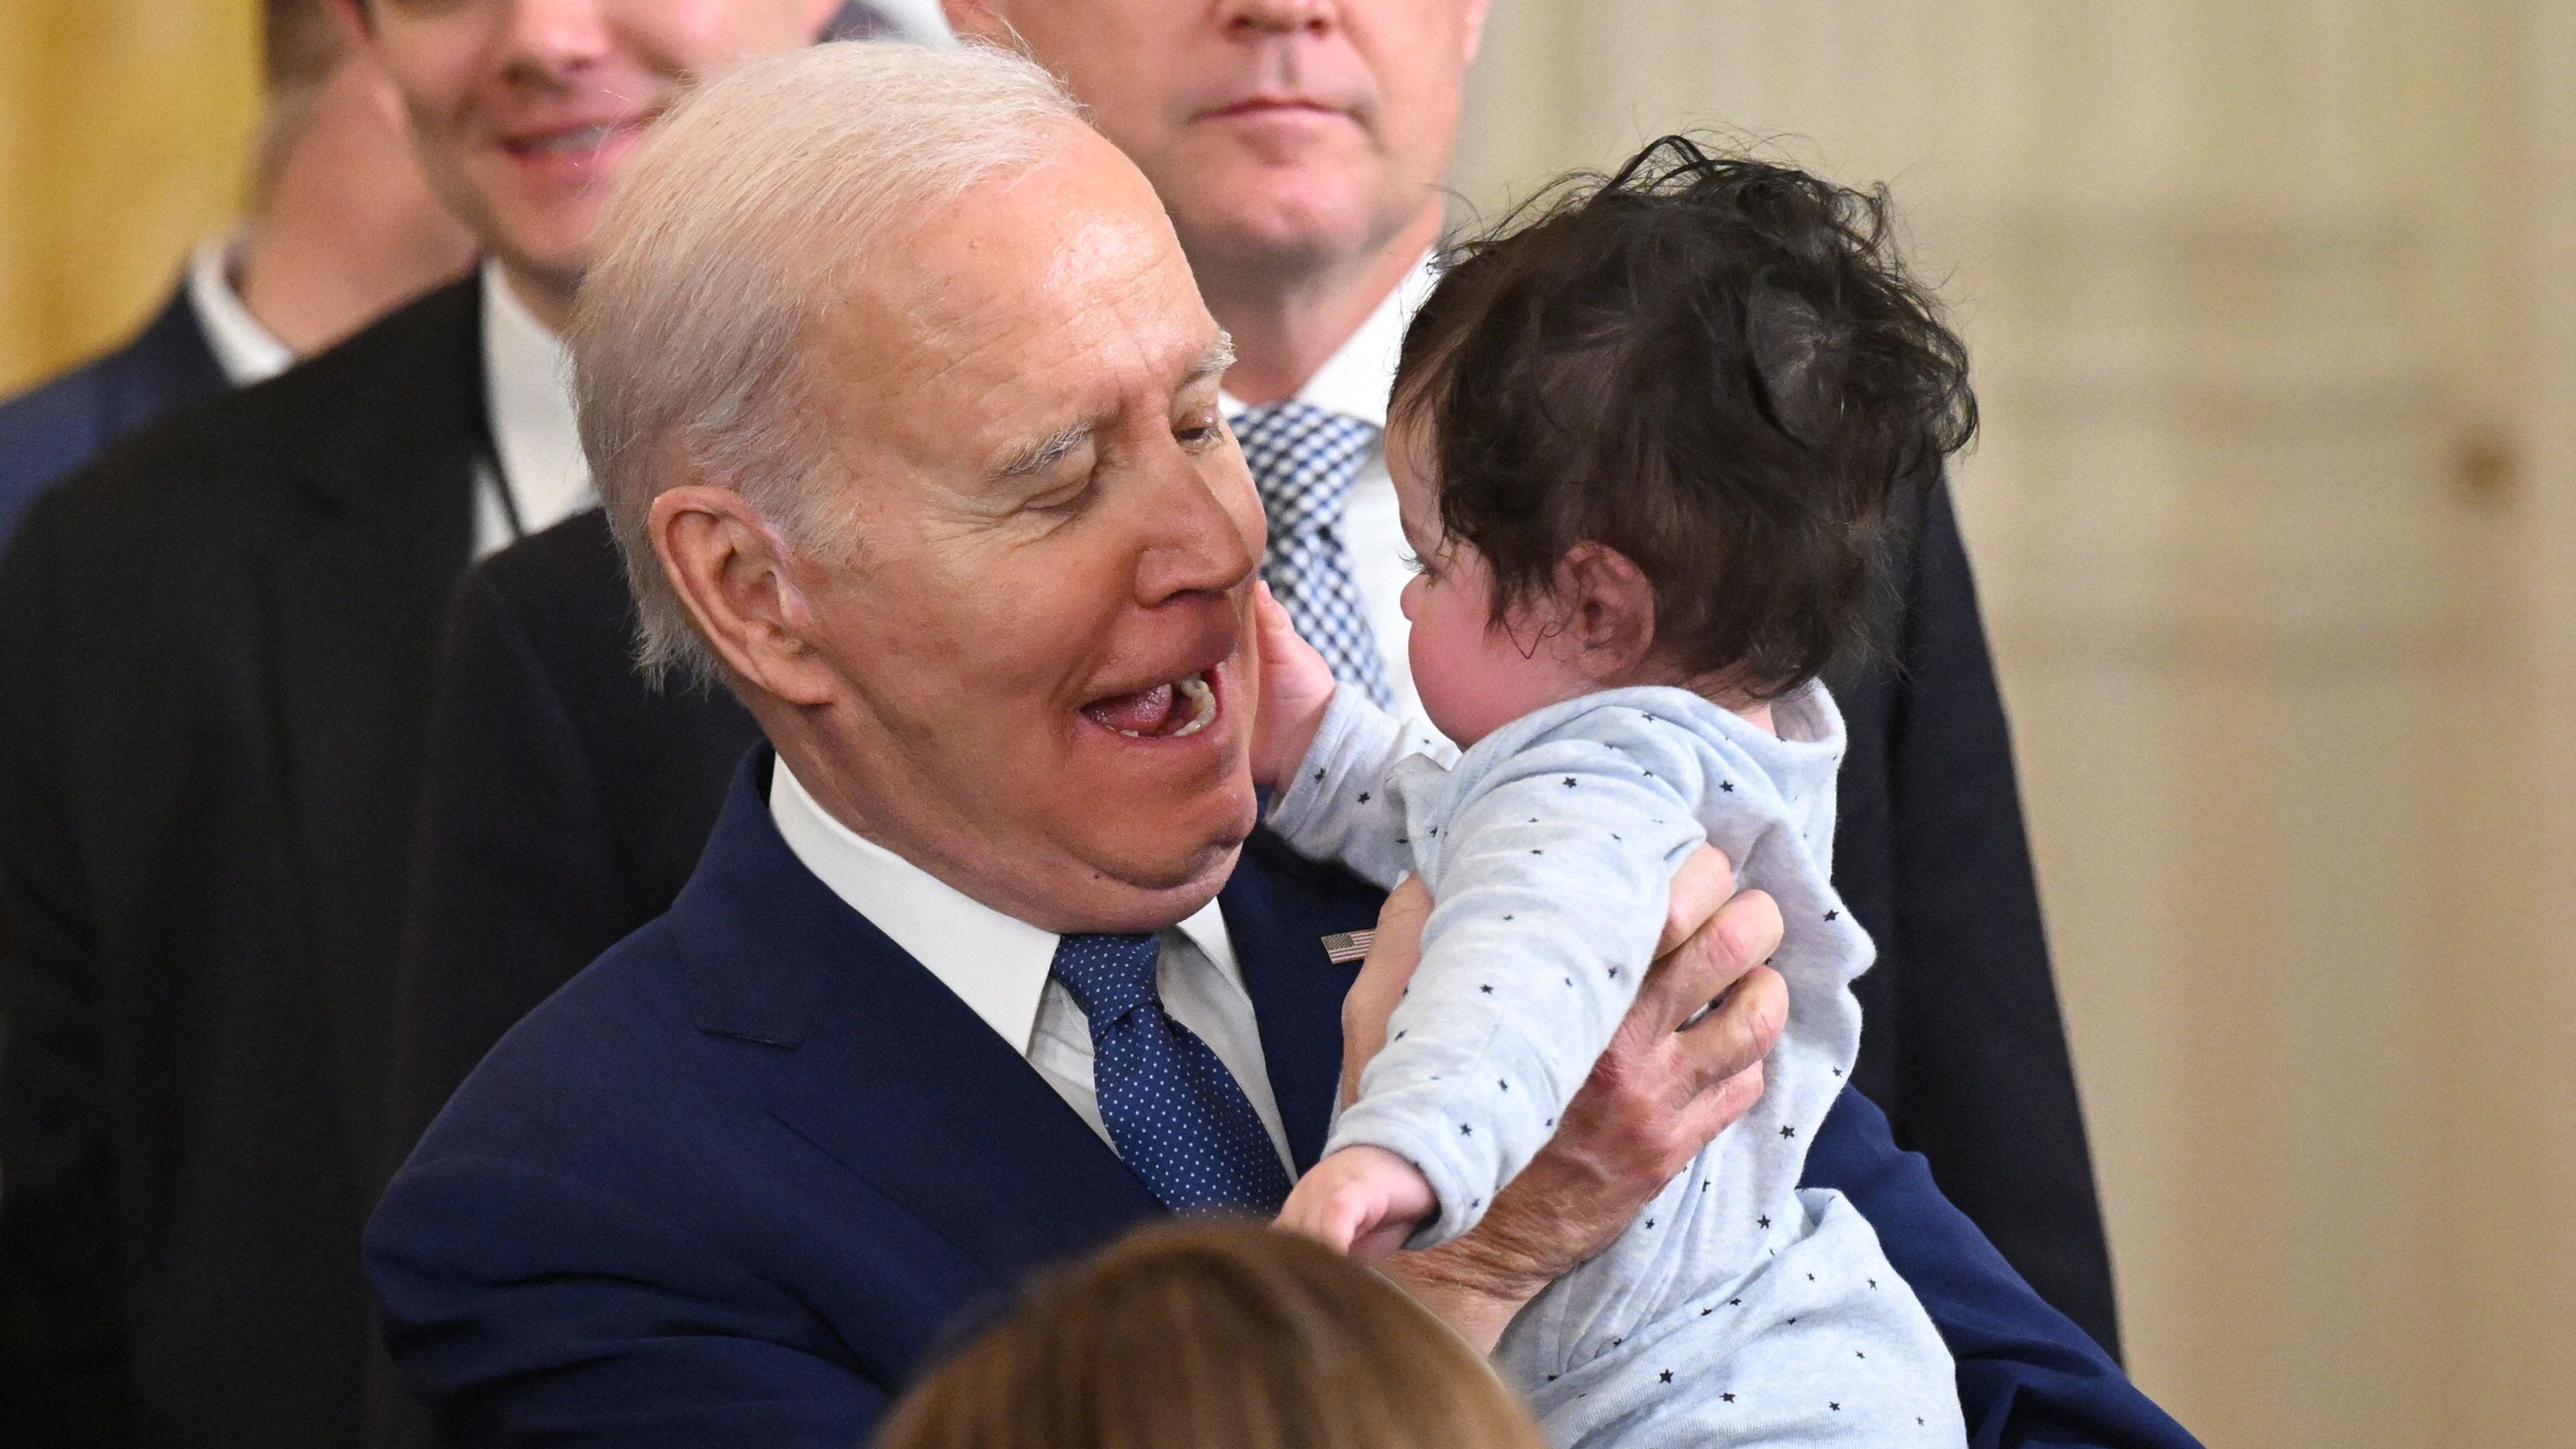 'Parents, do you agree?' Biden alarms with assertion there's 'no such thing as someone else's child'